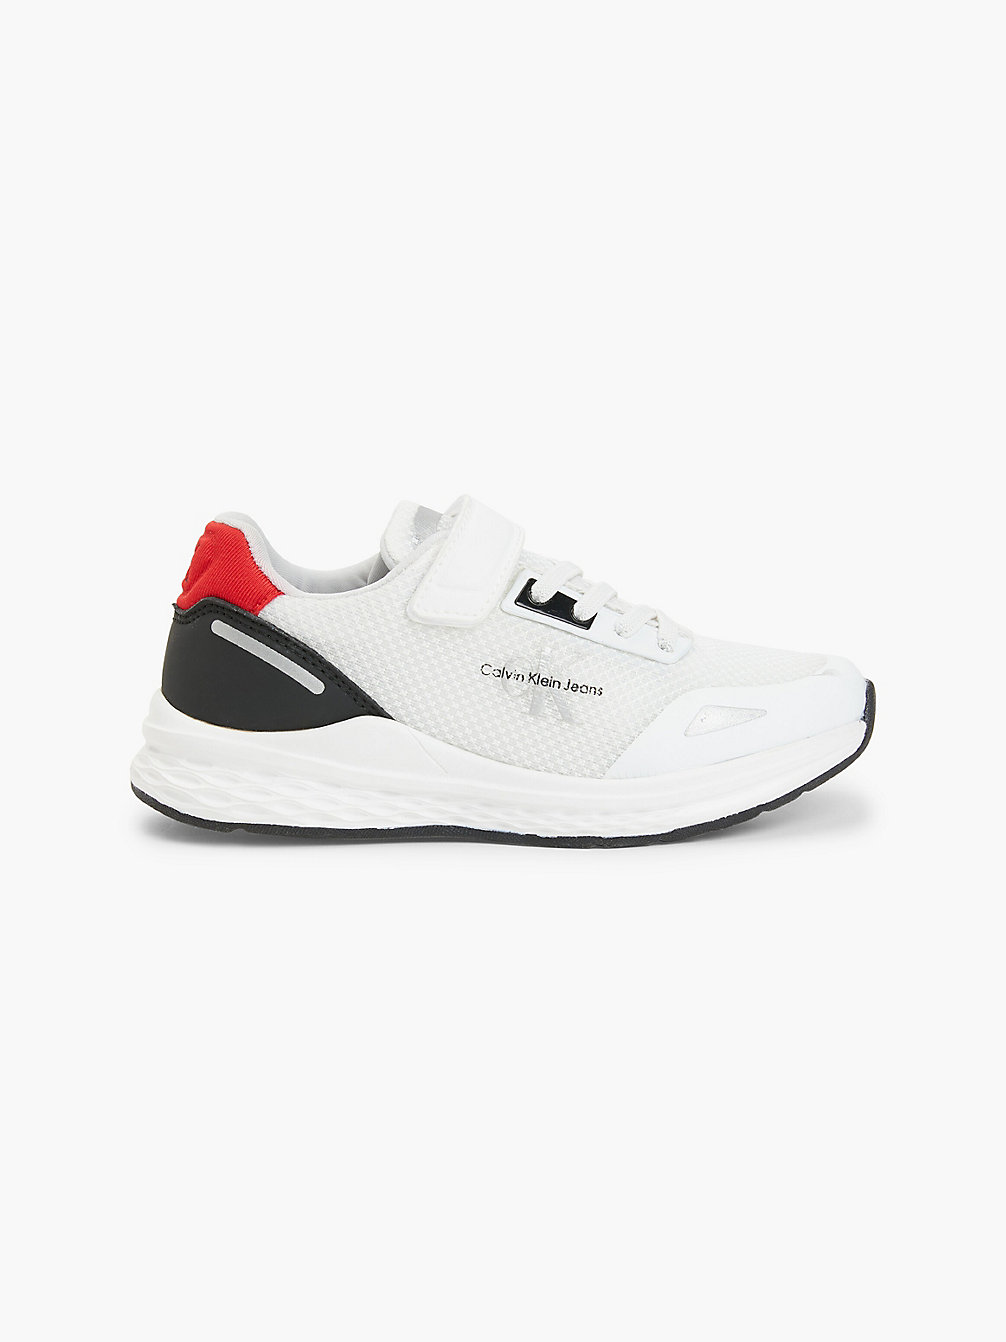 WHITE RED Mesh Trainers undefined boys Calvin Klein